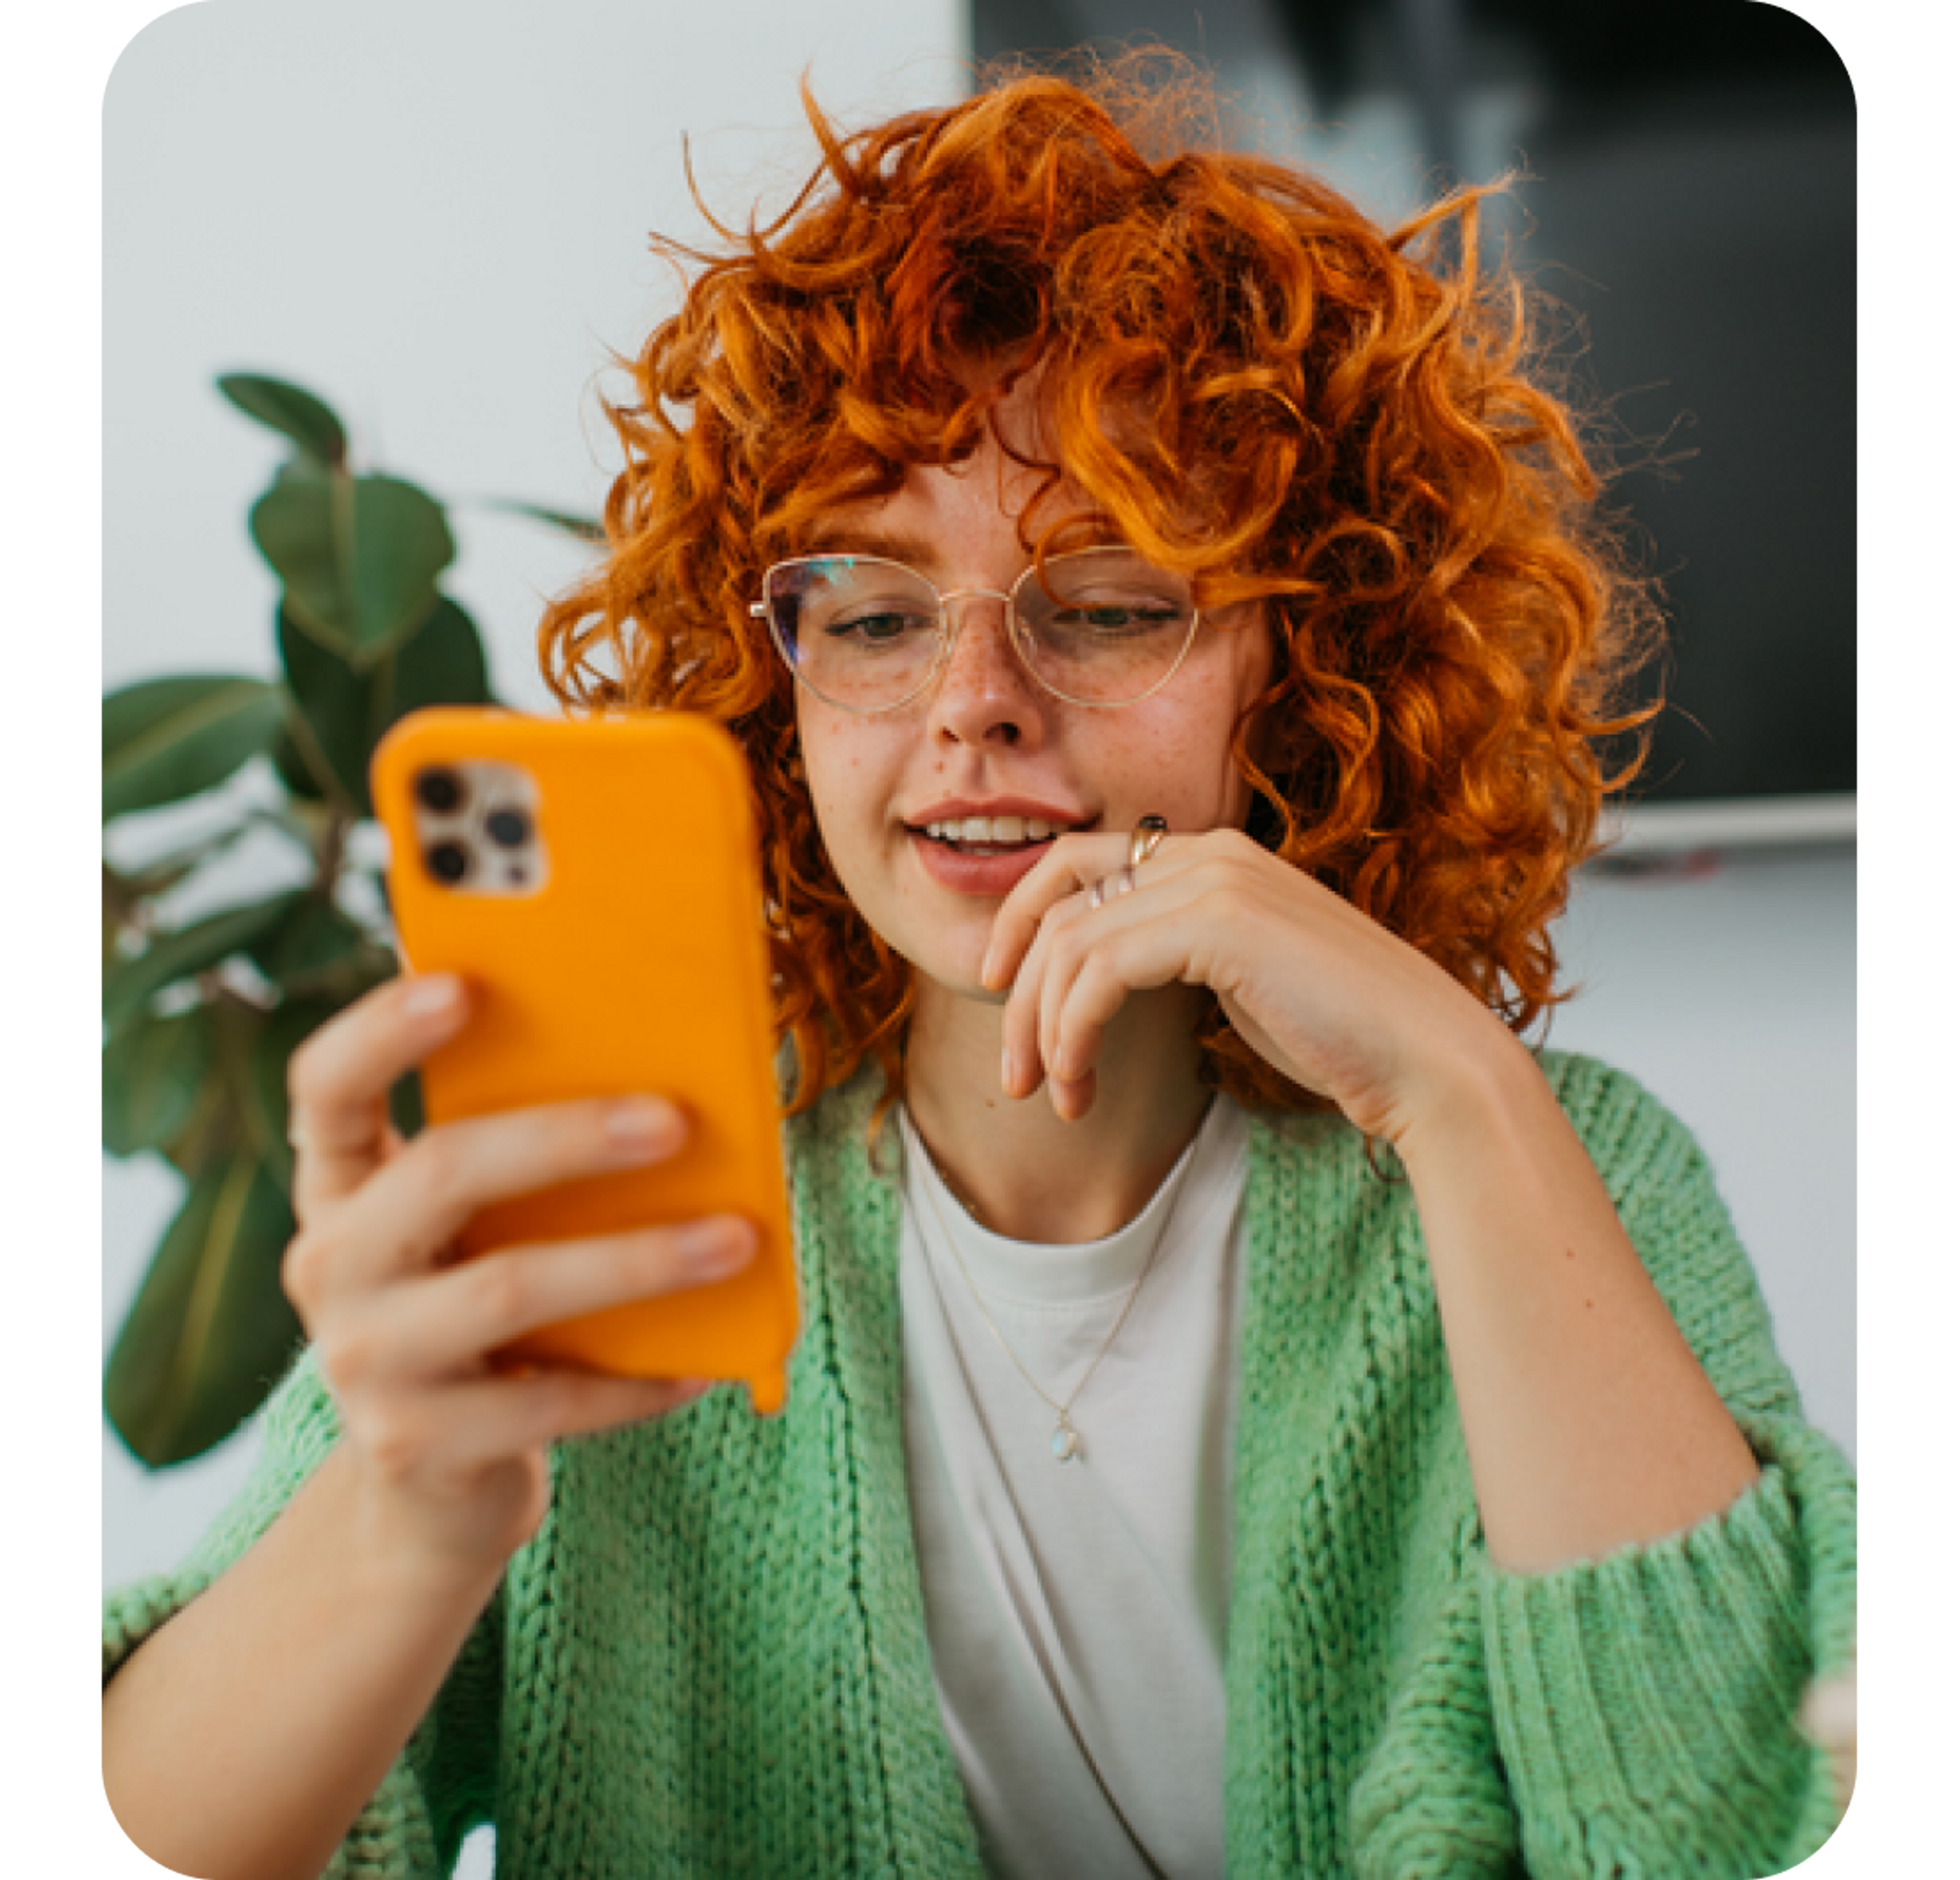 A photo of a woman smiling and looking at a phone